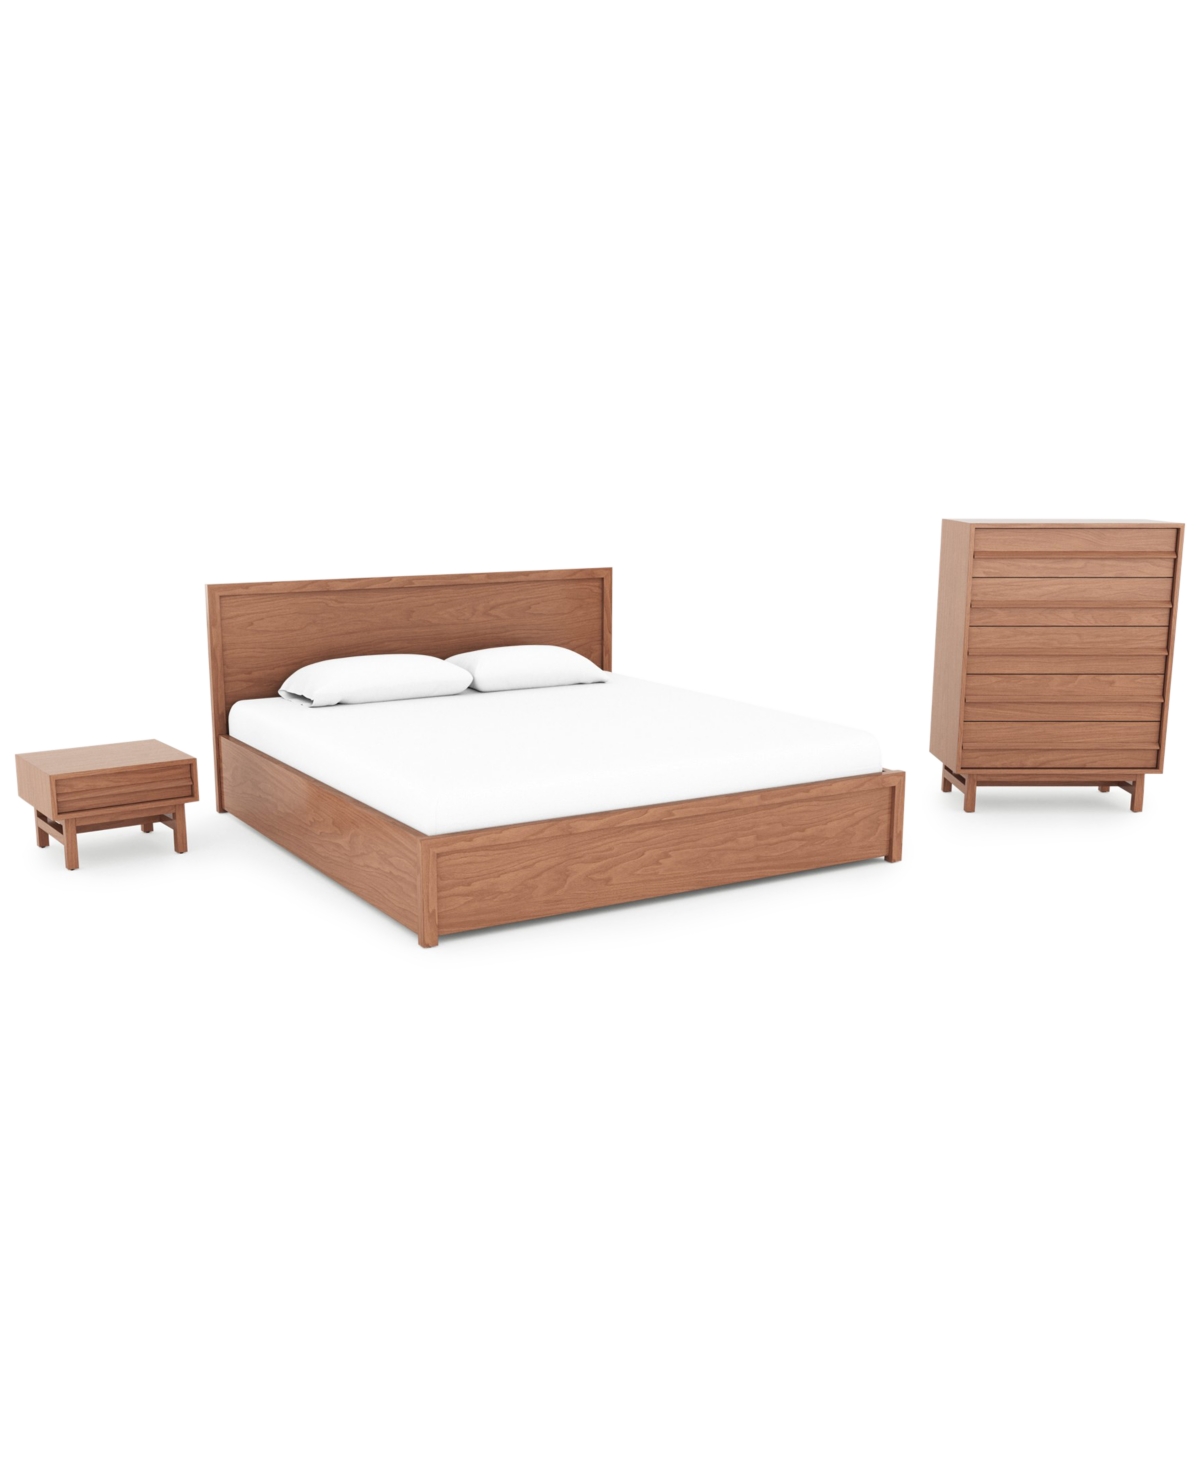 Eq3 Closeout! Bernia 3pc Bedroom Set (king Bed + Chest + Nightstand) In No Color